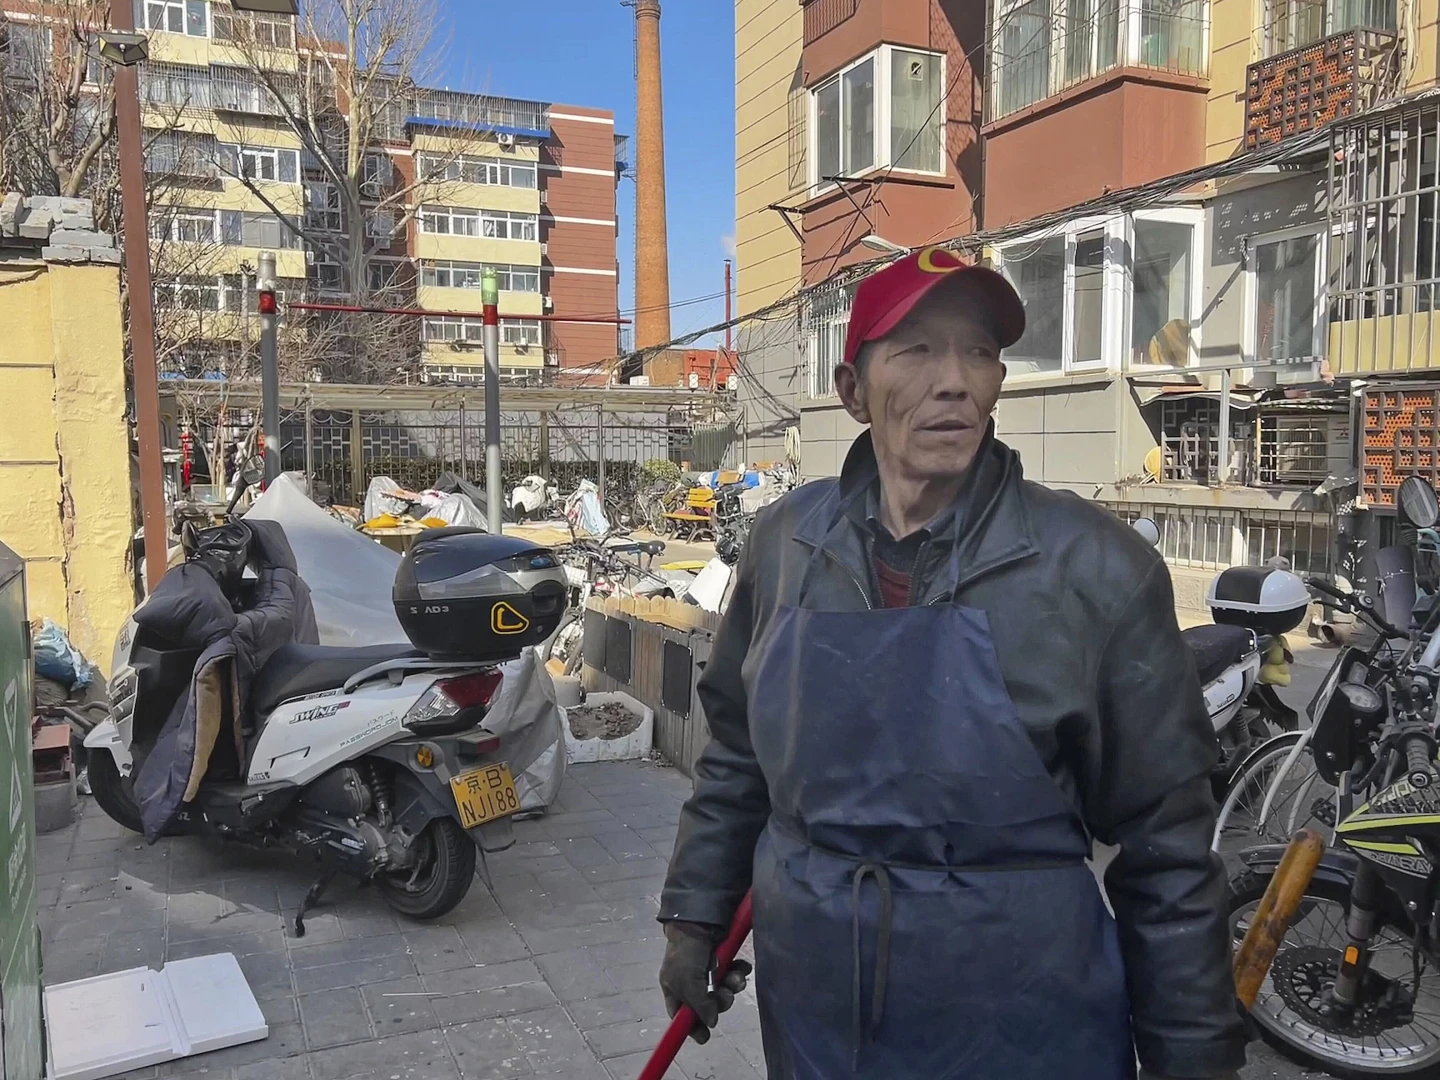 Migrant workers who helped build modern China have scant or no pensions, and can’t retire